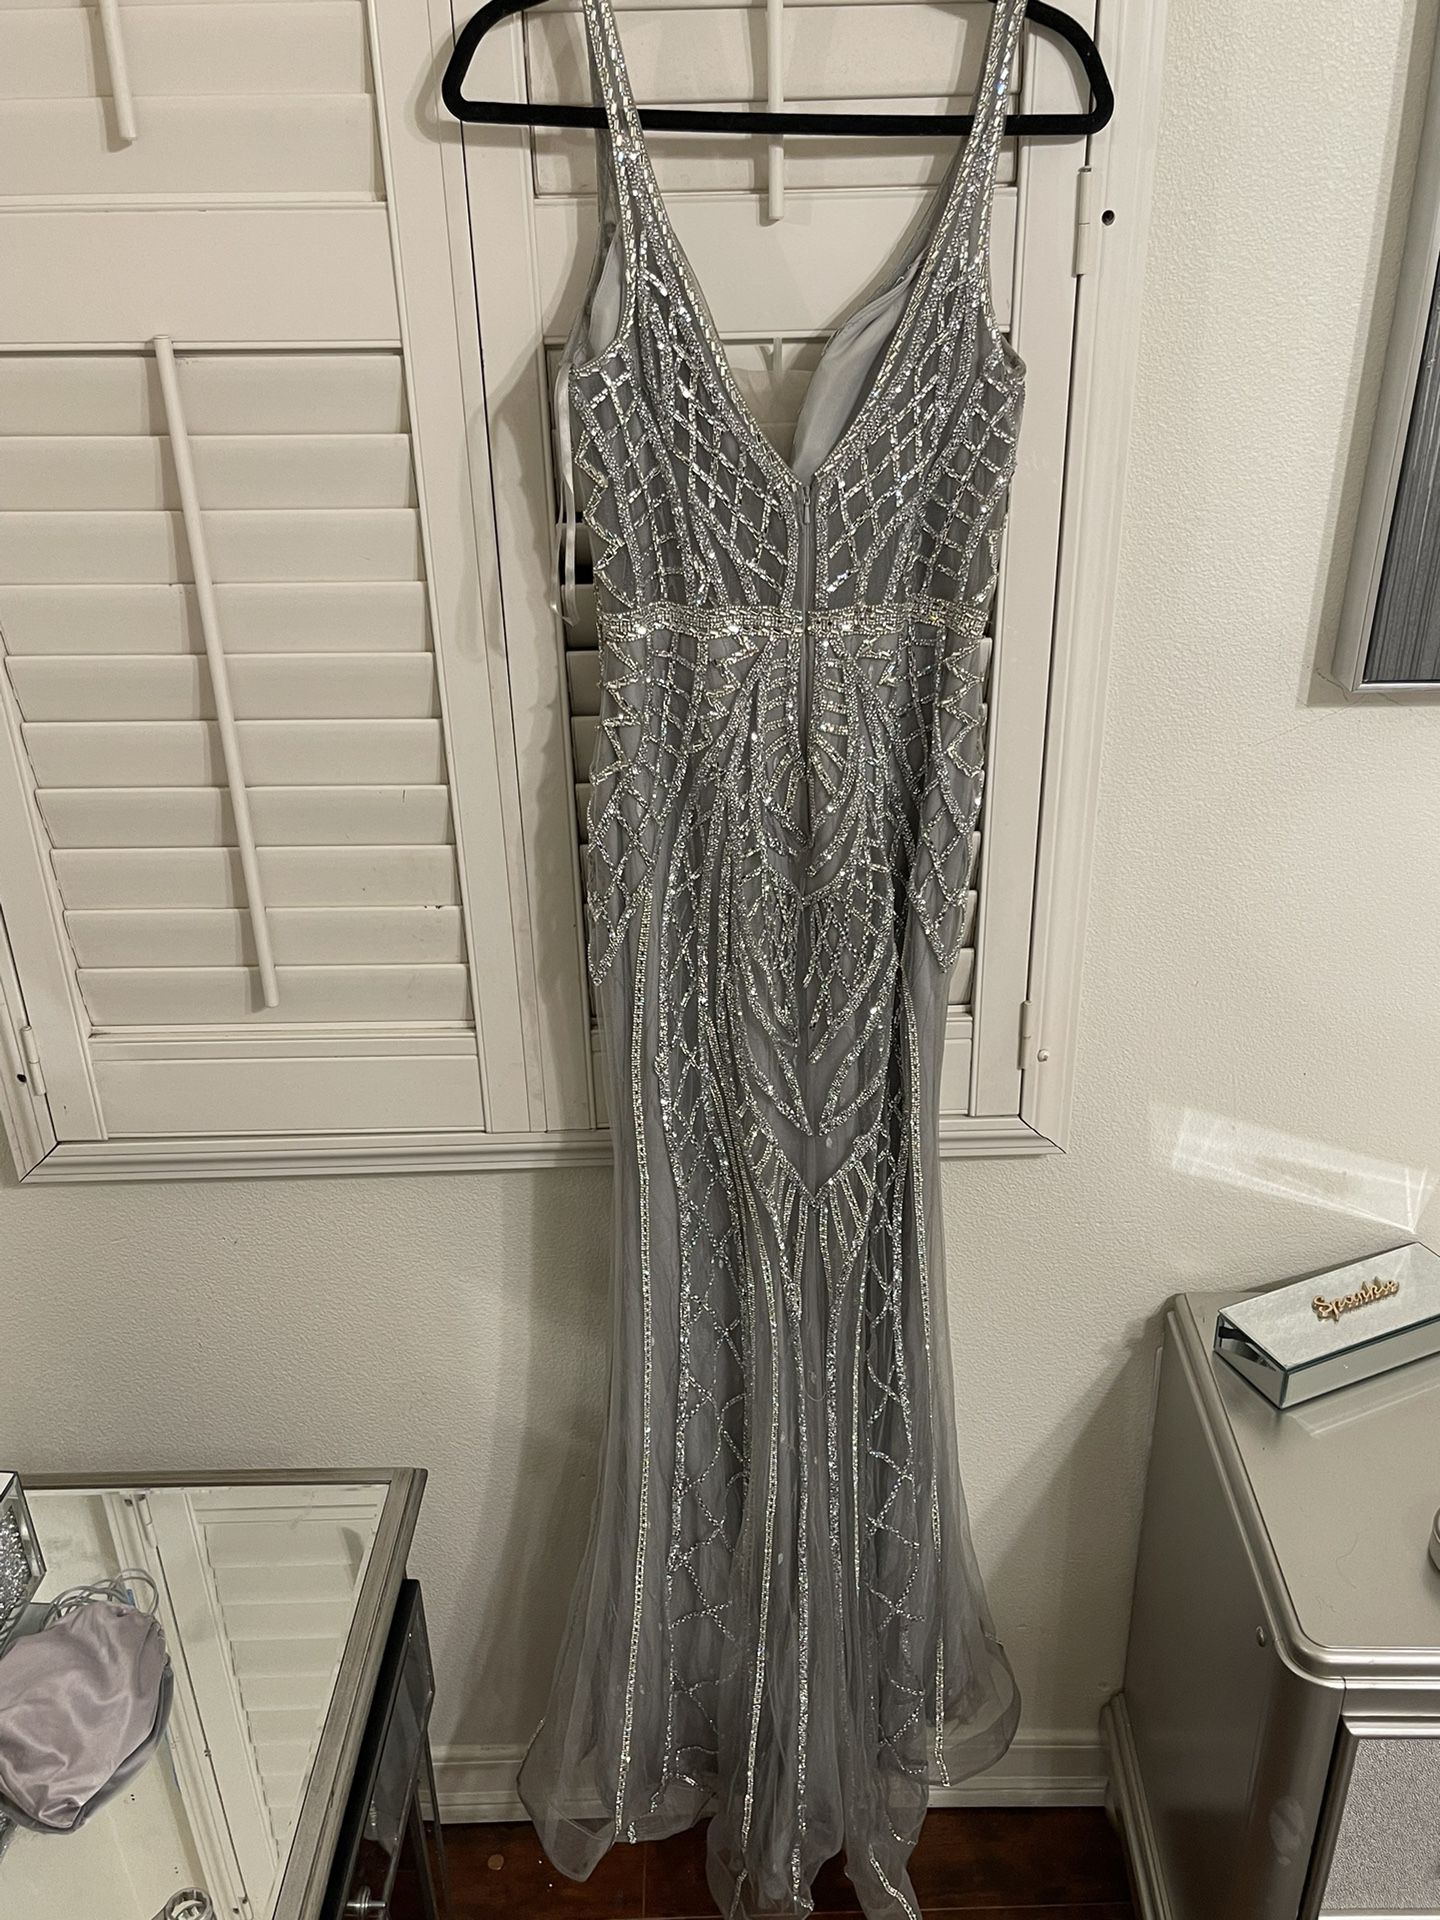 SILVER prom dress, worn once , great condition , taking